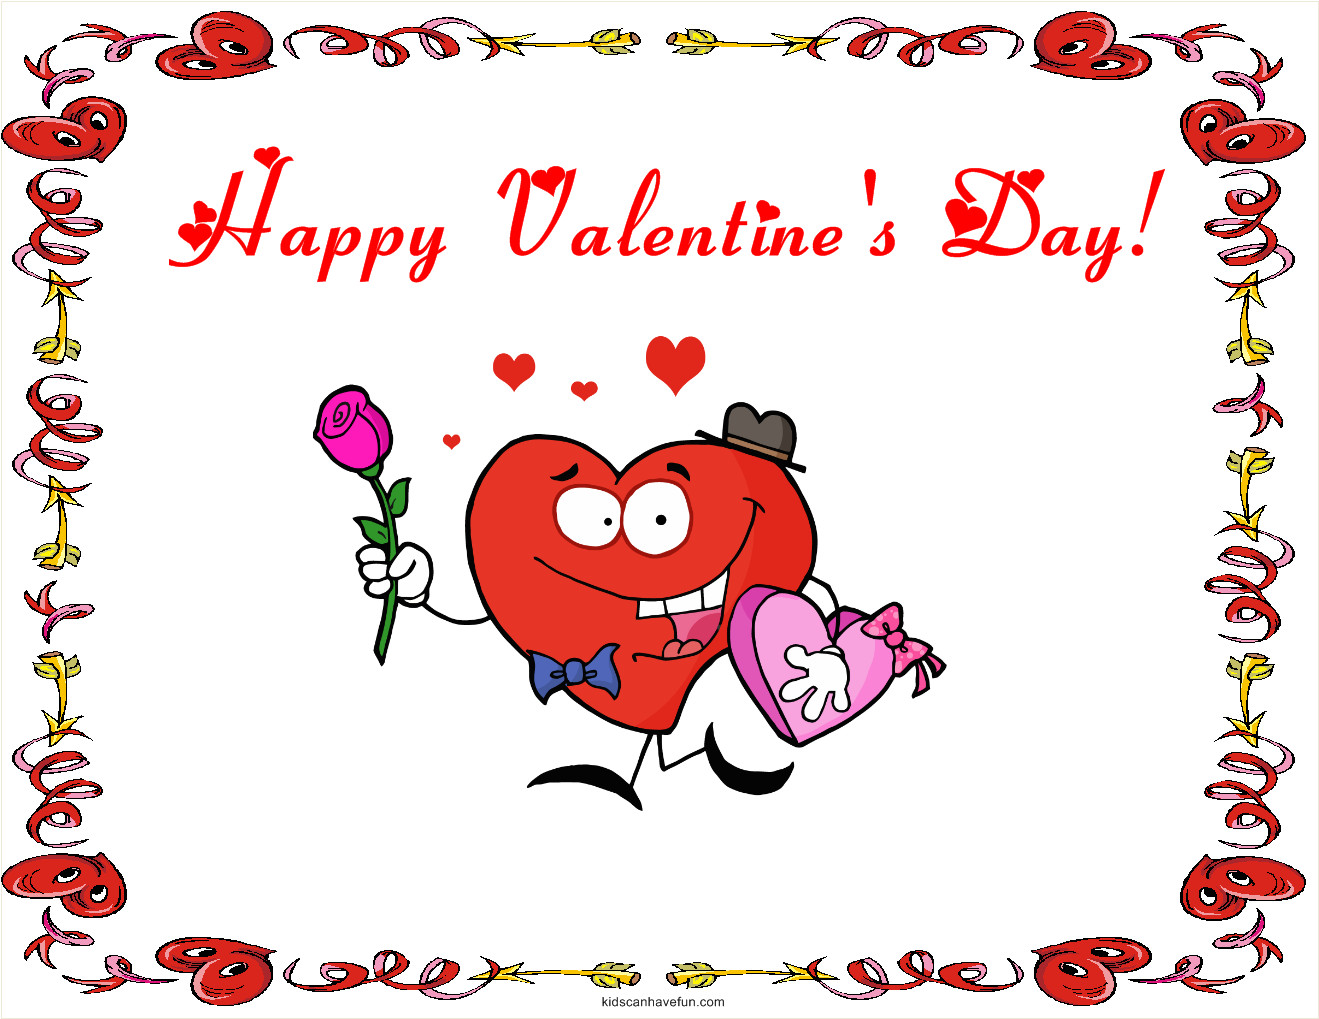 Valentine Day Quotes For Kids
 Entirely from heart Happy Valentine’s Day